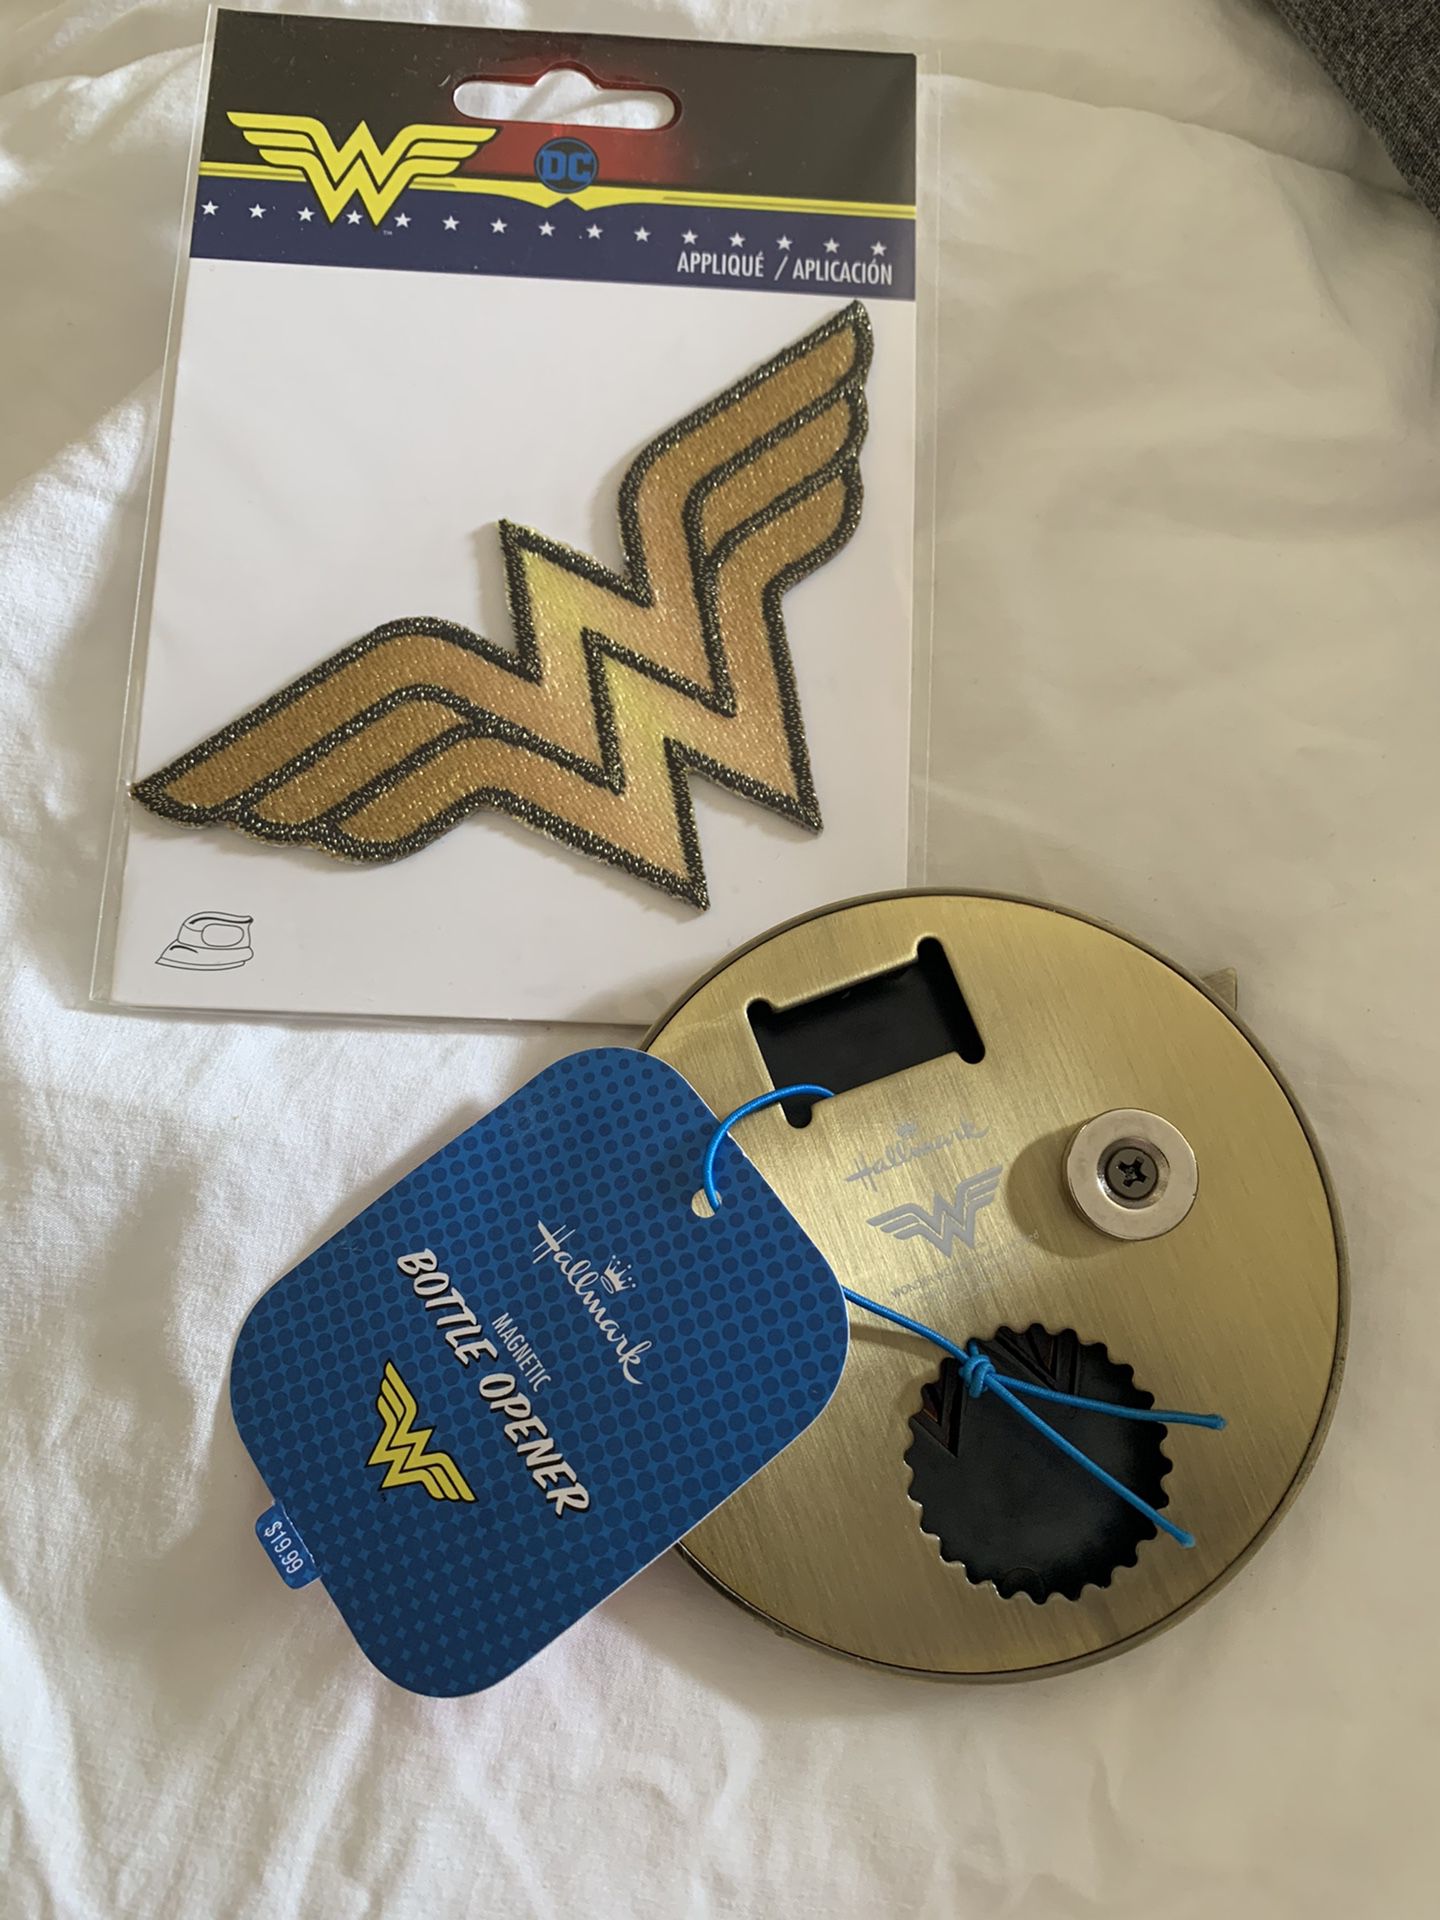 Wonder Woman Bottle Opener And Patch